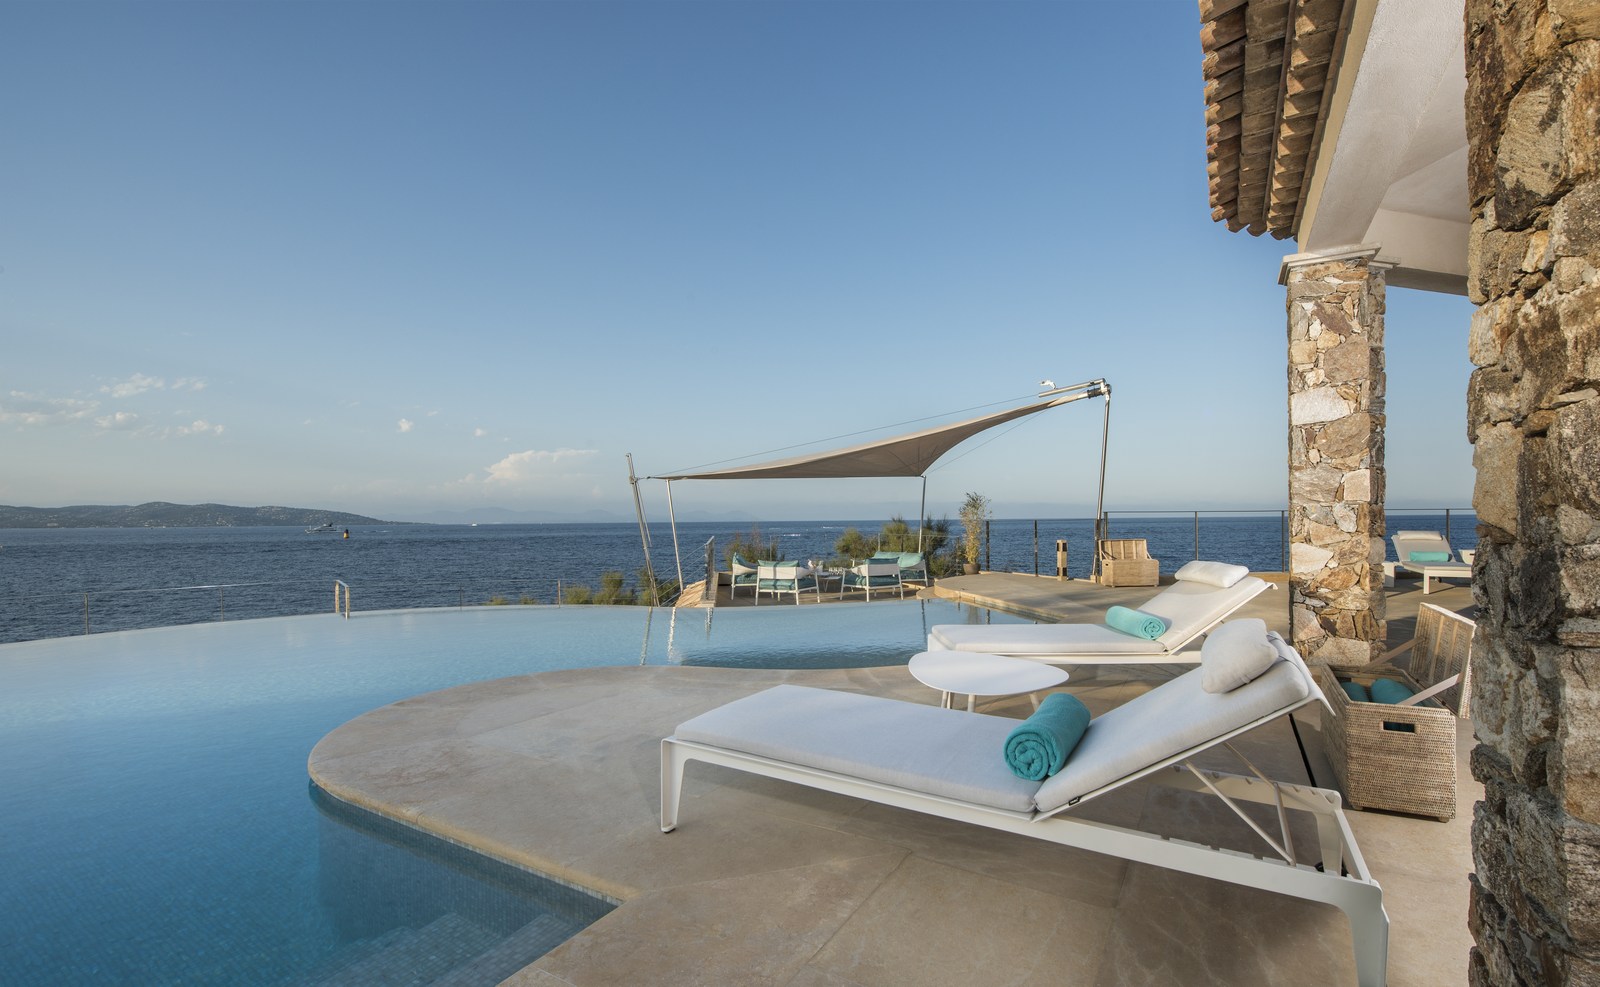 View from the swimming pool of Villa des Voiles, Cote d'Azur